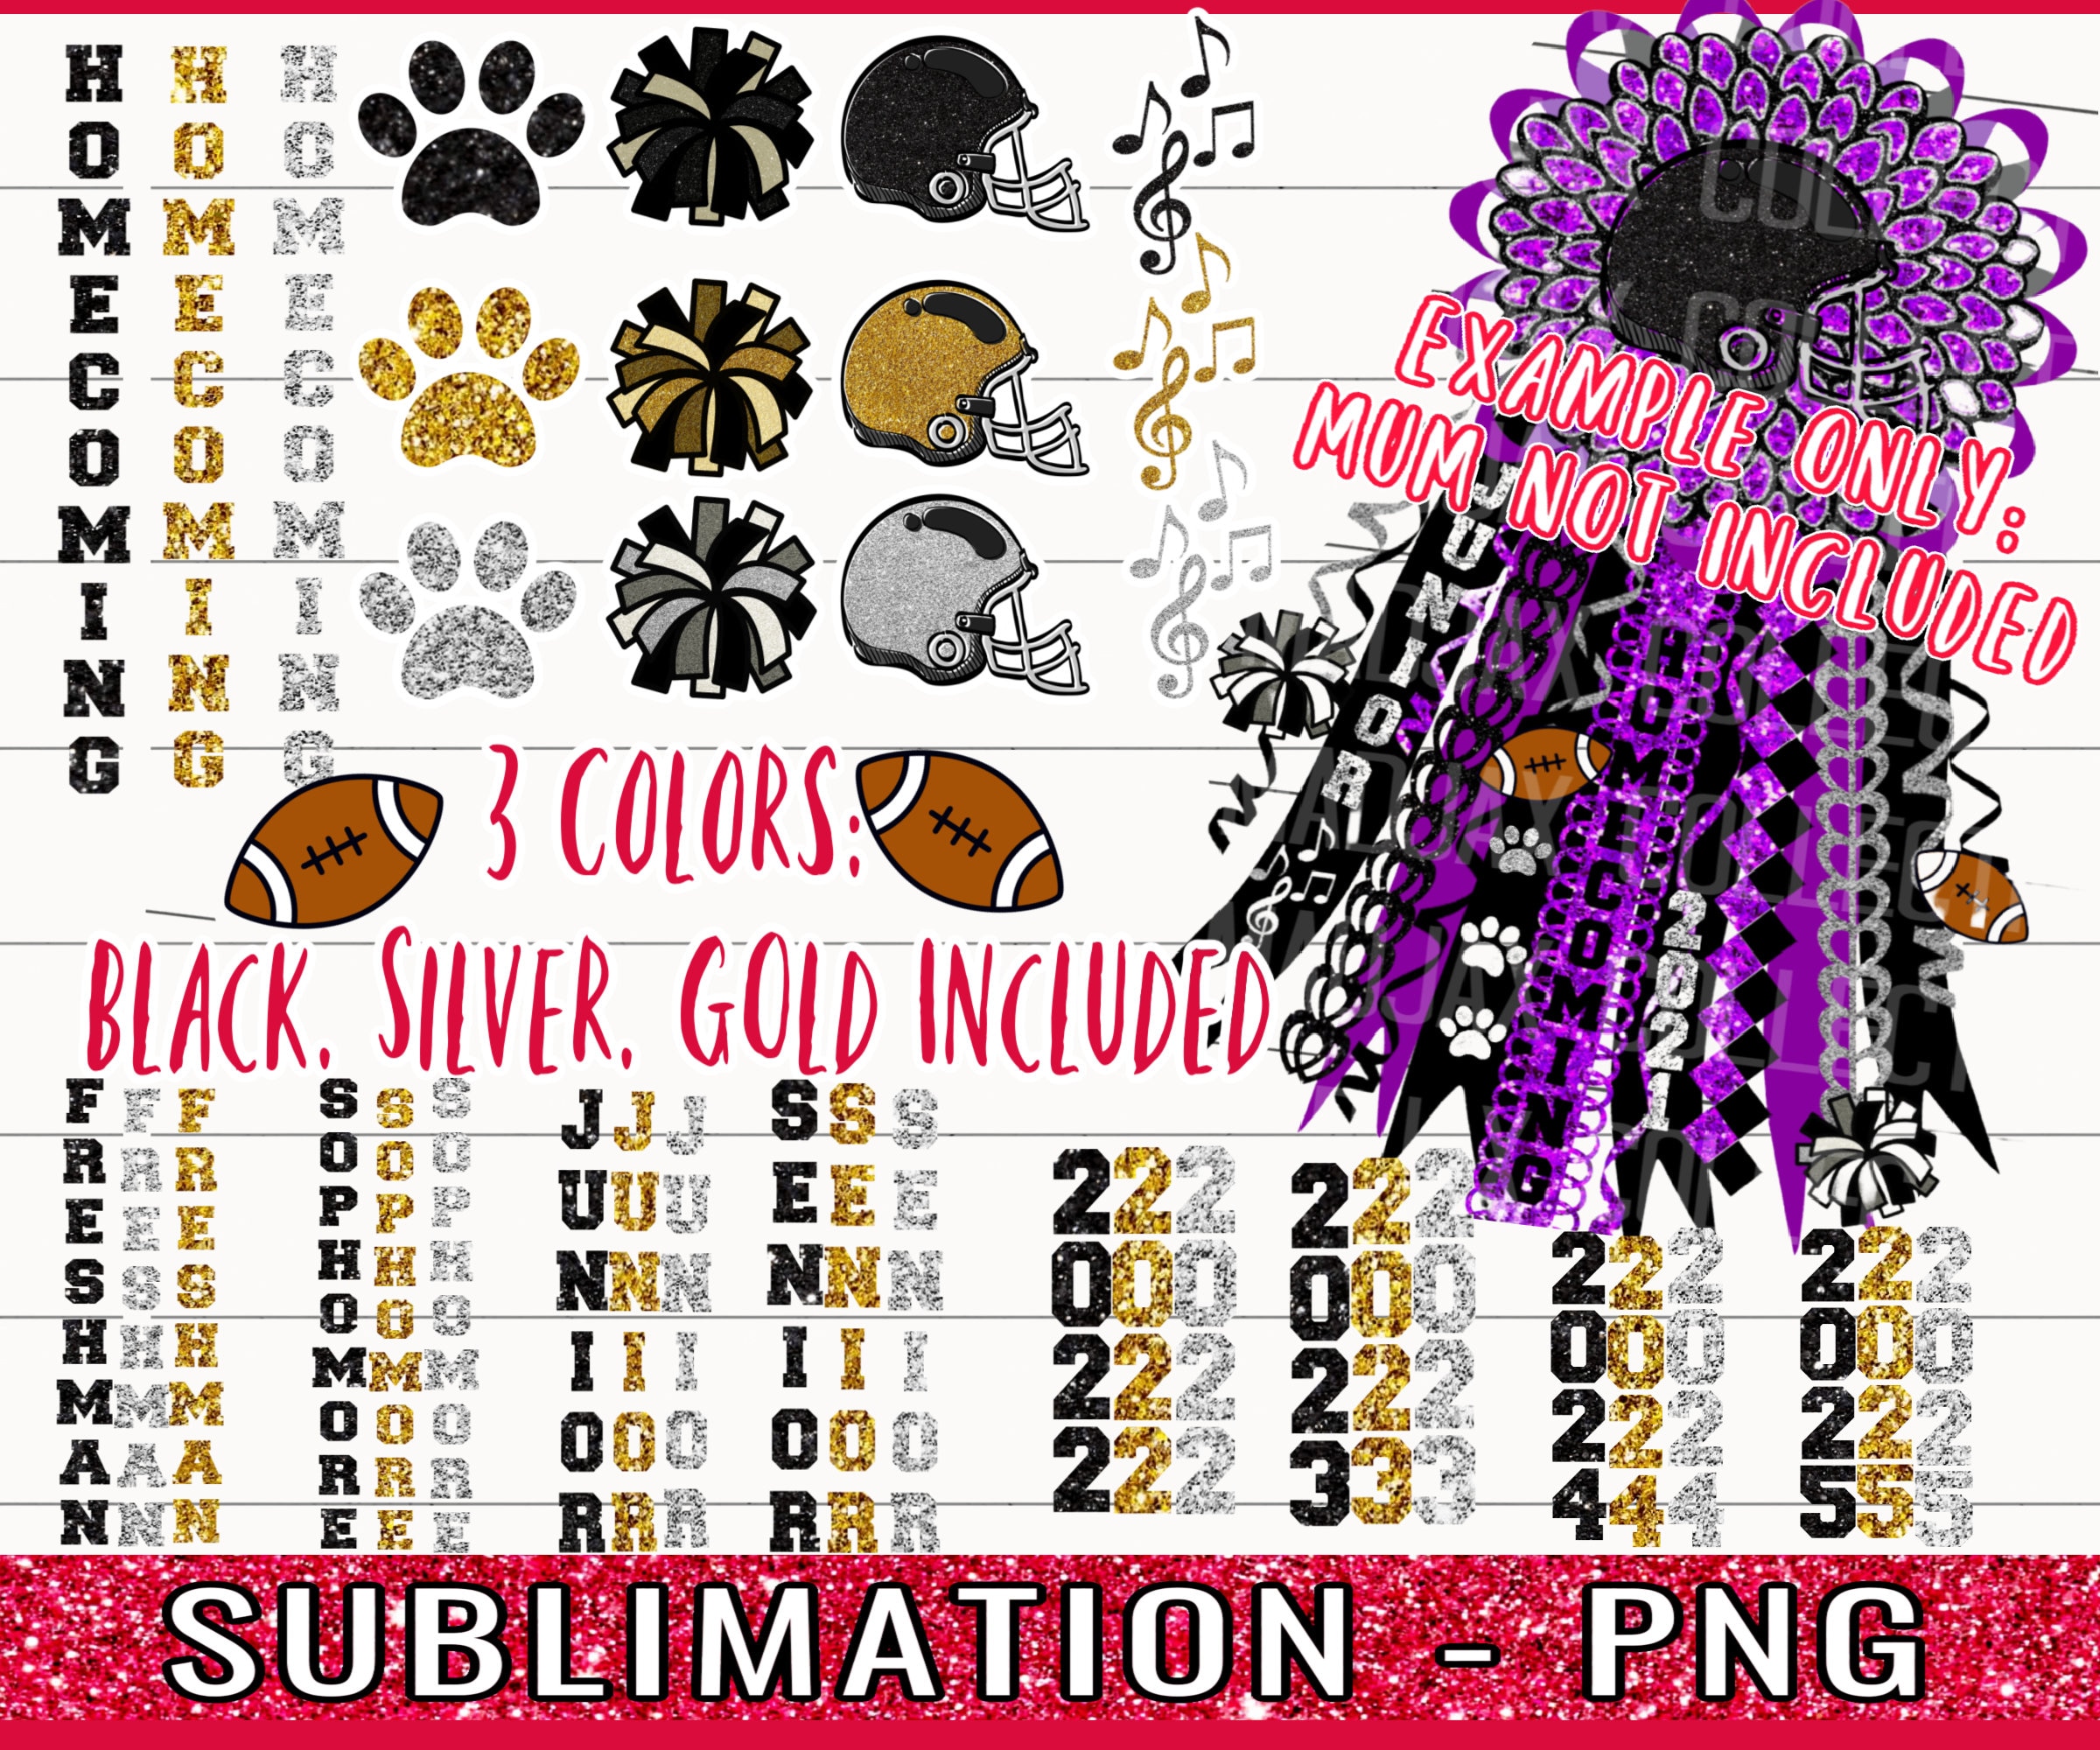 Homecoming Mum Add Ons, Mum Not Included, PNG Clipart Bundle, Sublimation  Designs, Silver Black Gold, Printable, Football, Cheer, Texas Mum - Etsy  Sweden